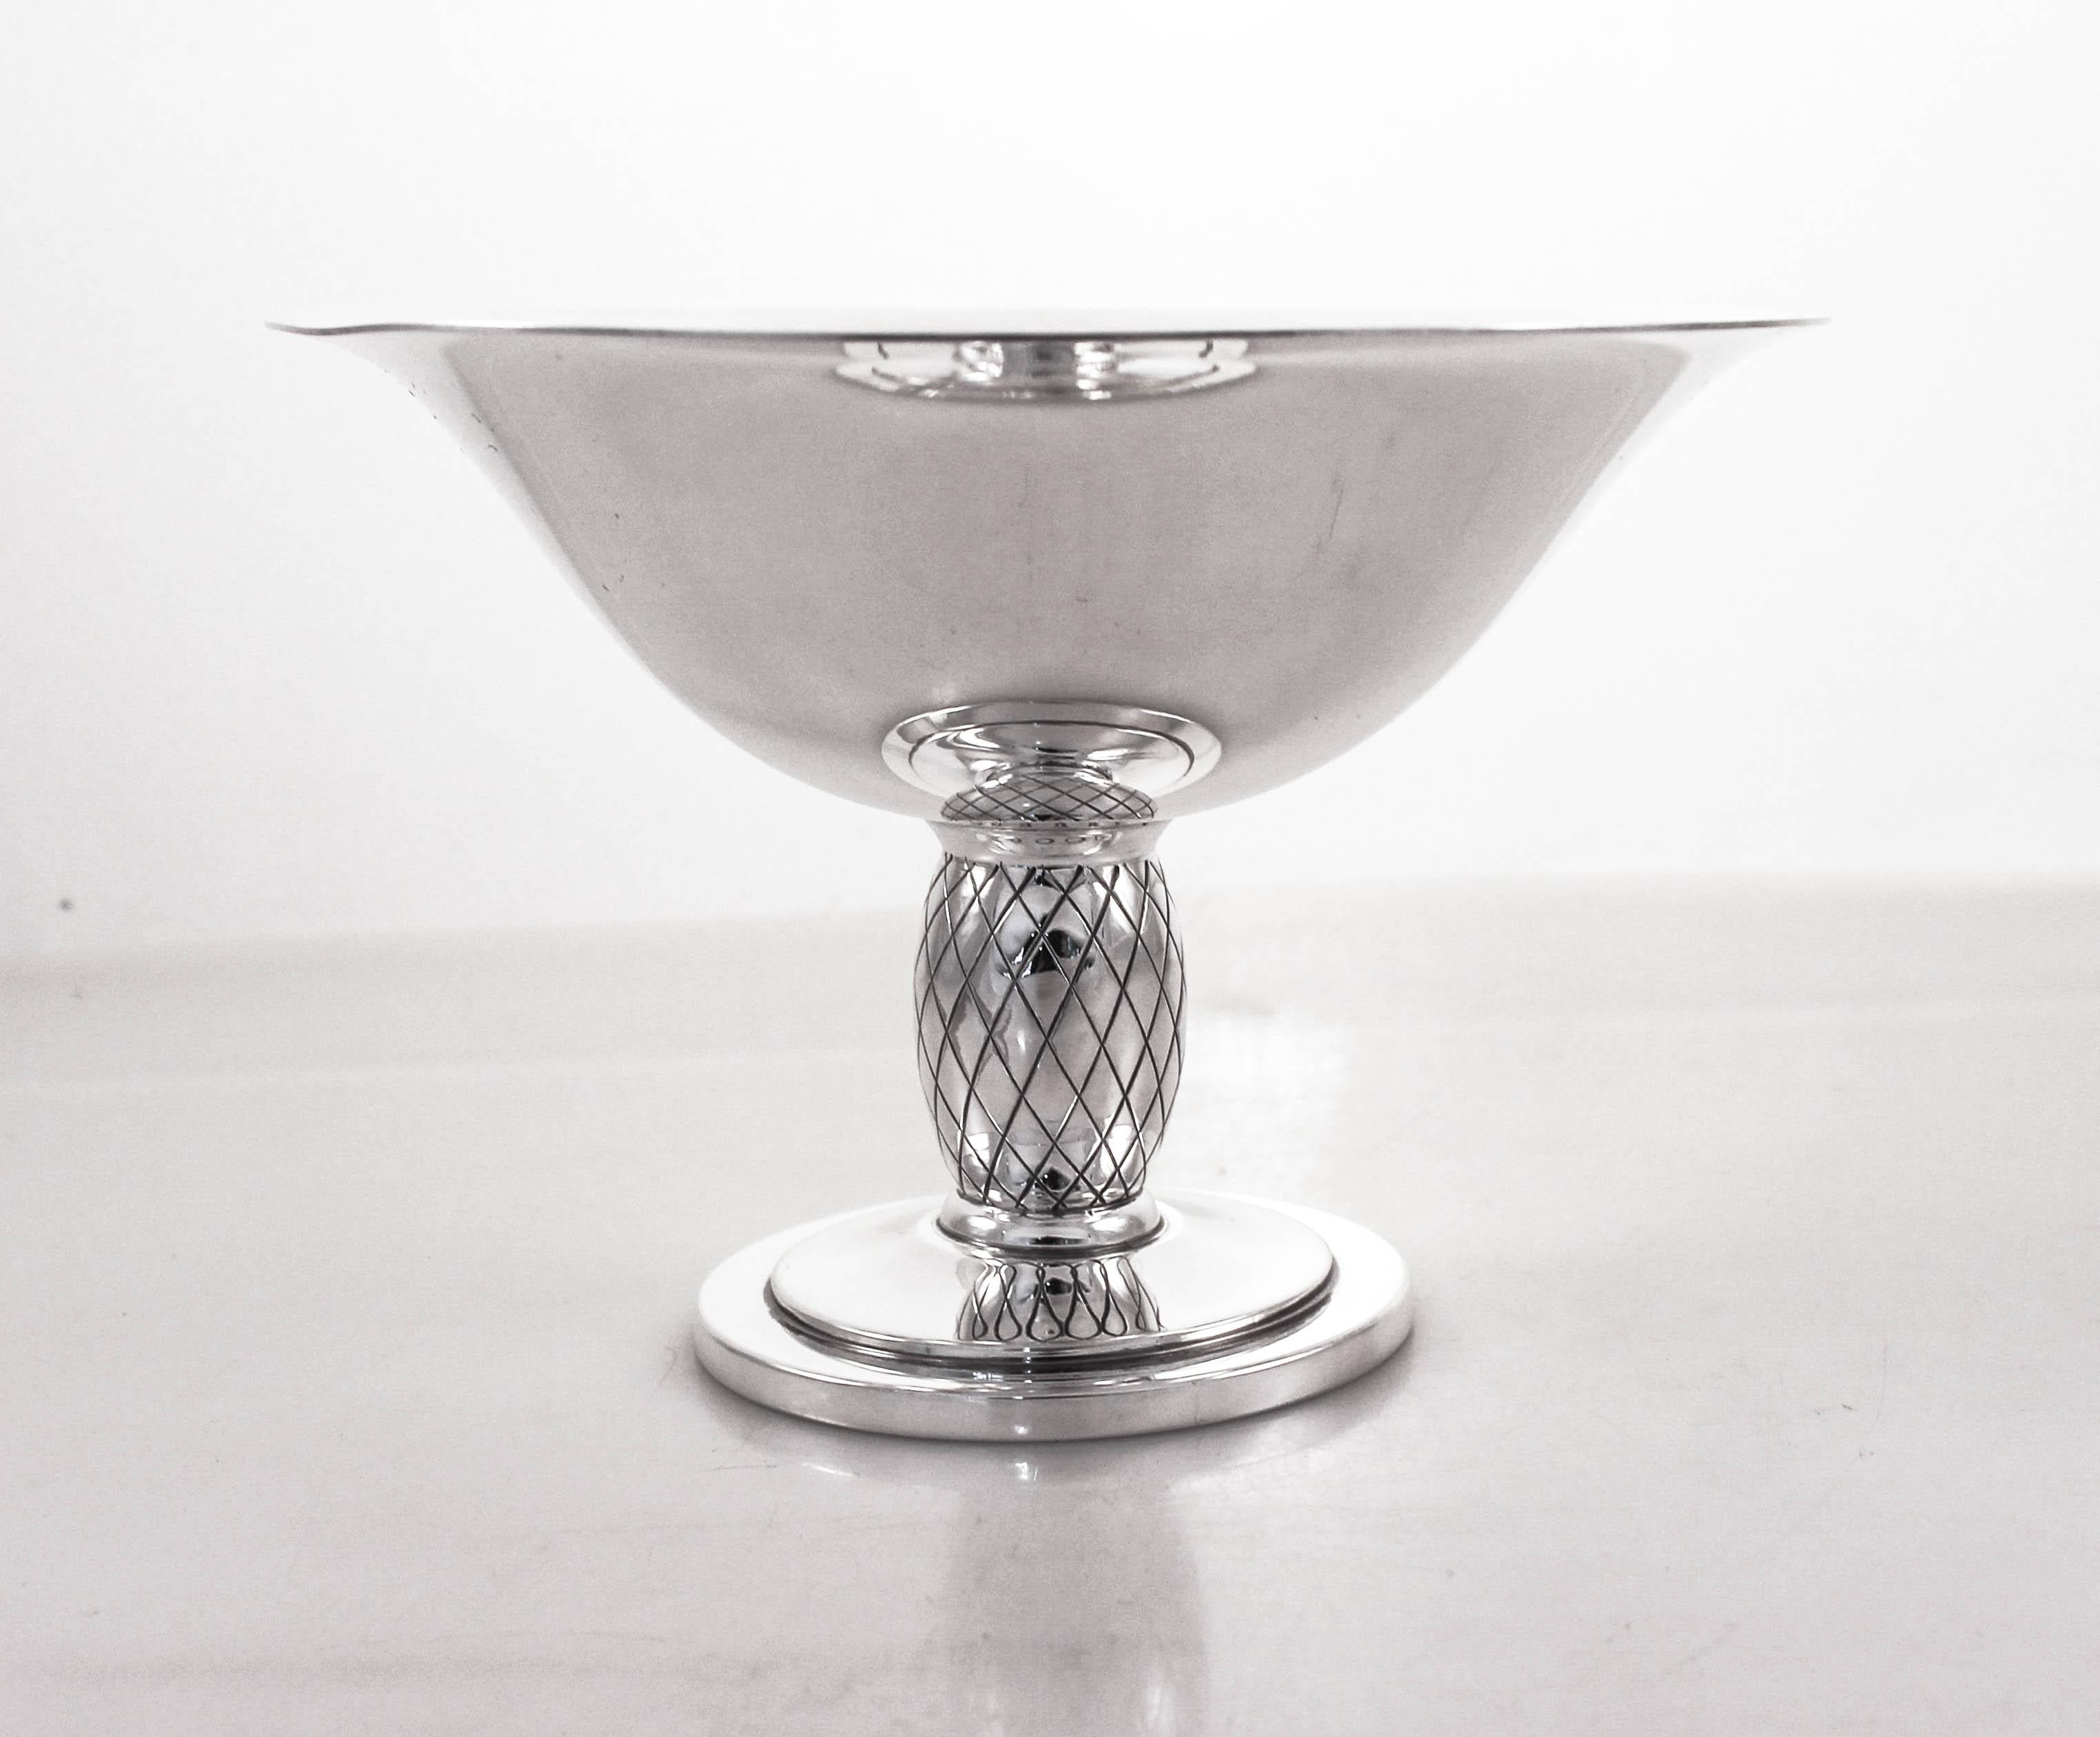 Proudly offering a pair of sterling silver compotes by one of Denmark’s foremost silversmiths, CC Hermann. Designed in an Art Deco pattern, both the top and base are clean while the stem has a triangular/diamond pattern. The compotes are nice and